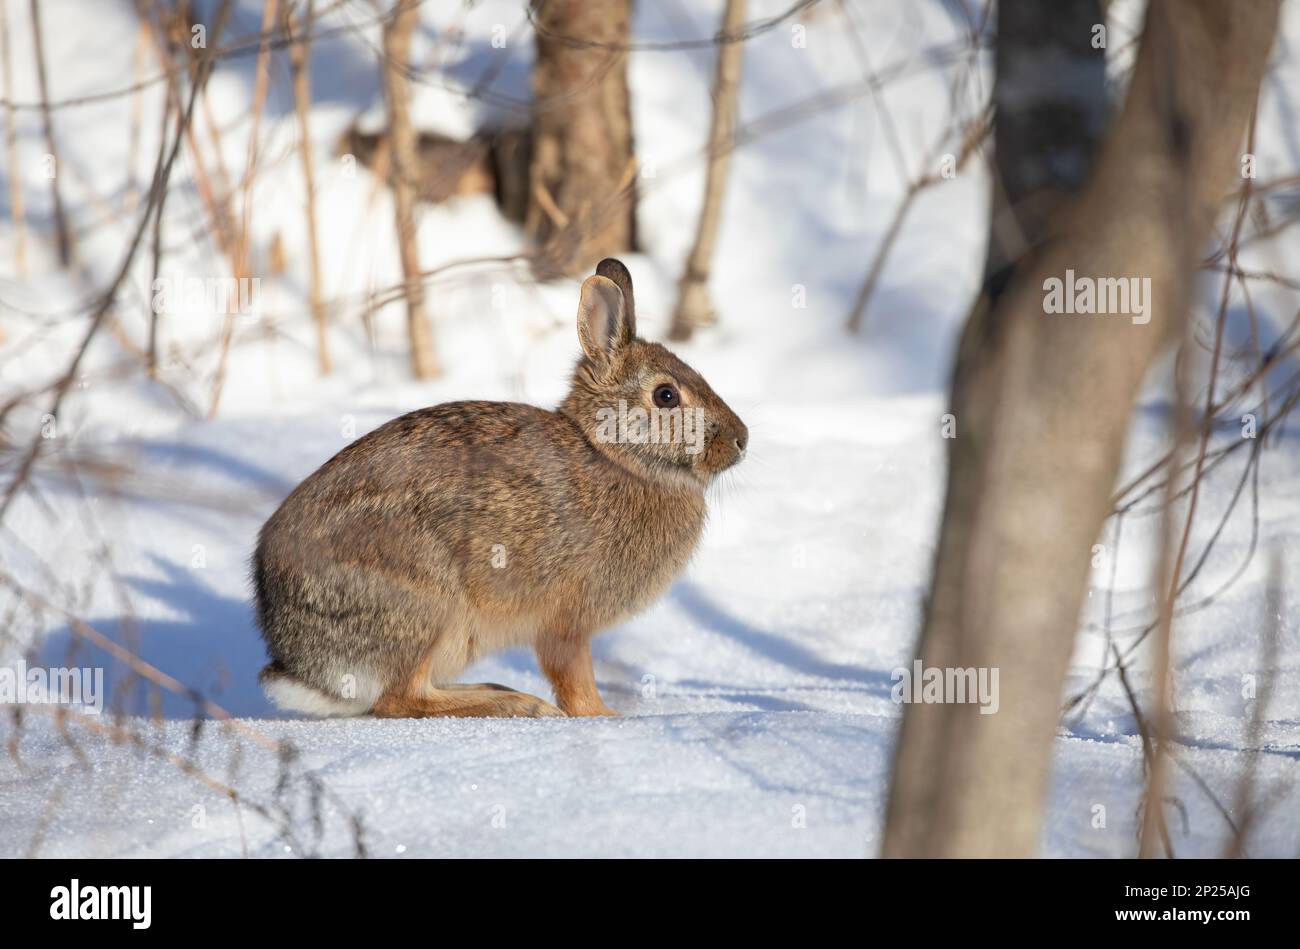 Eastern cottontail rabbit standing in a winter forest. Stock Photo